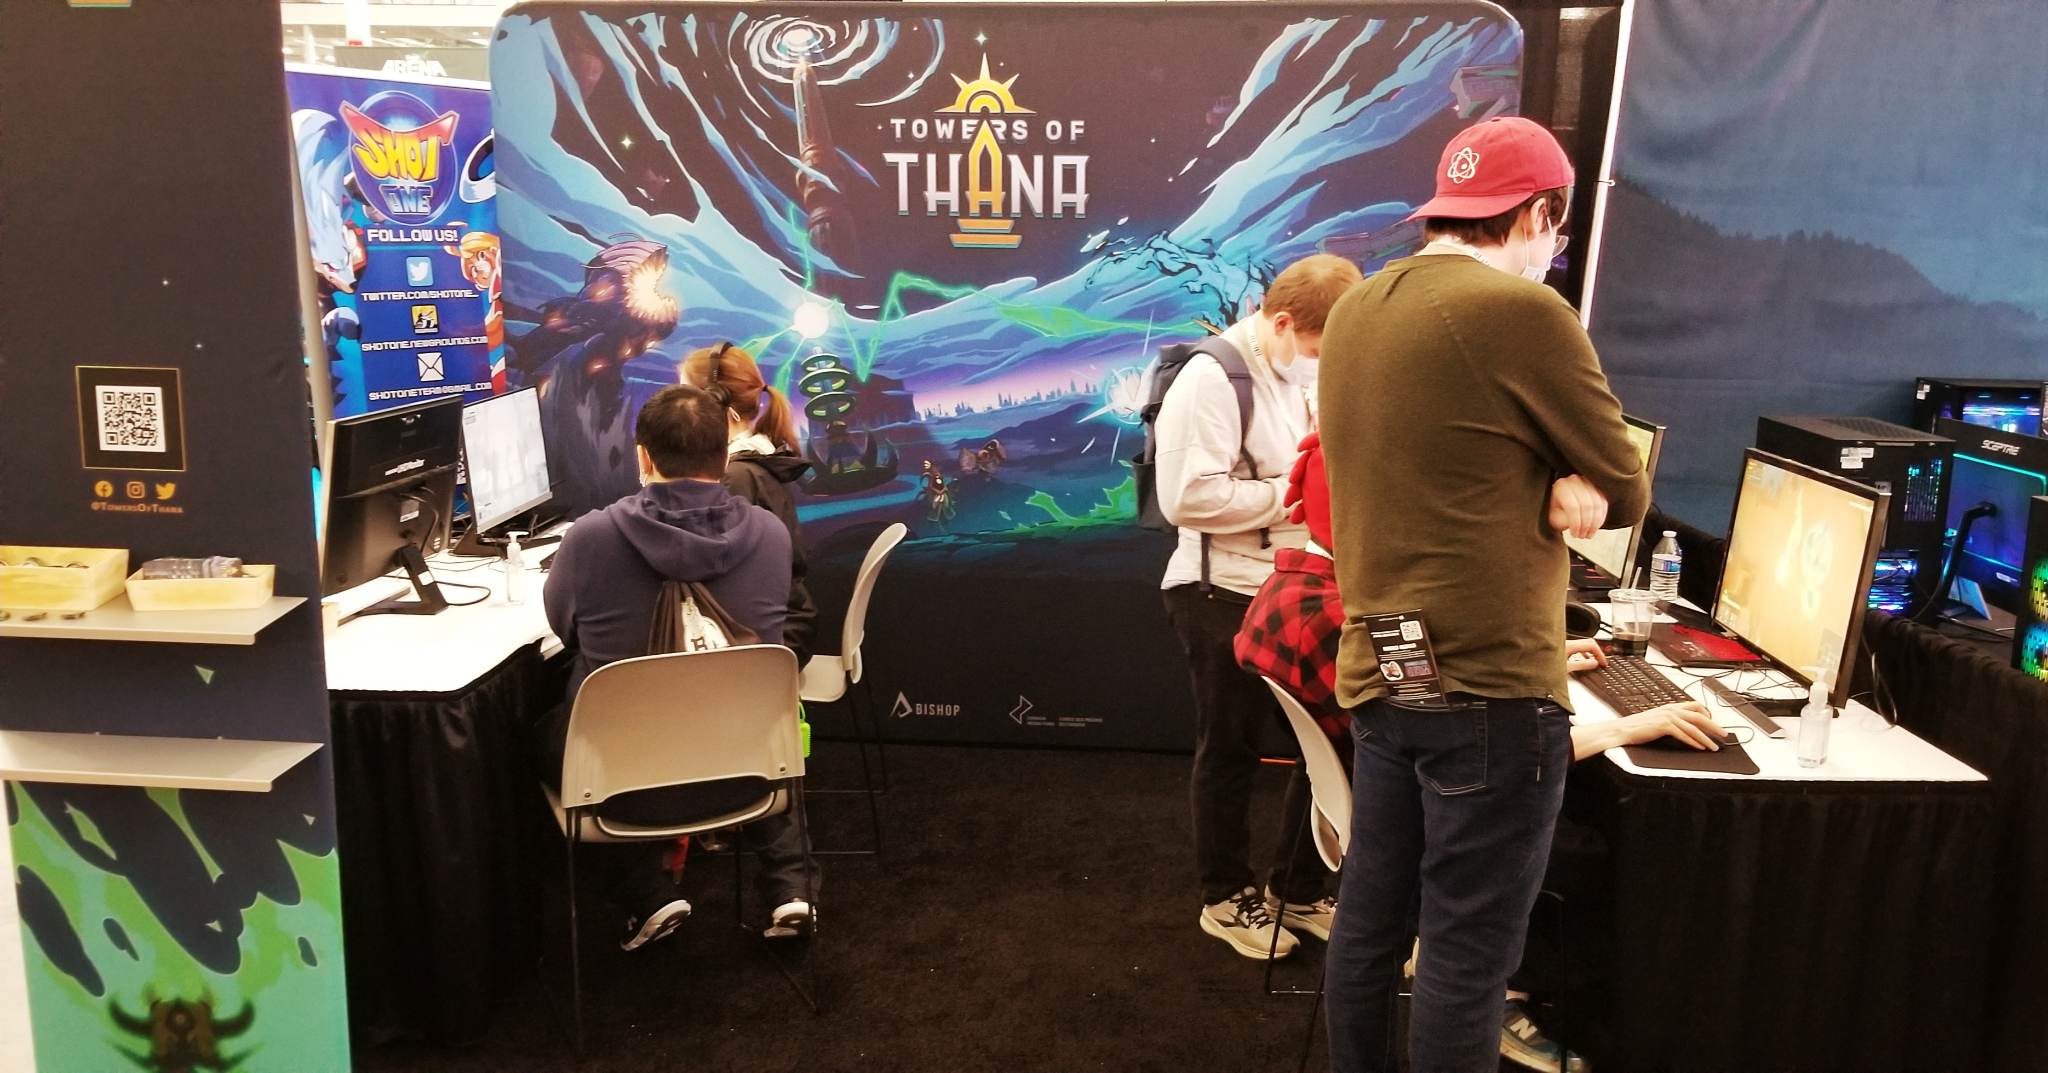 PAX Recap: A Wonderful First Showing for Towers of Thana